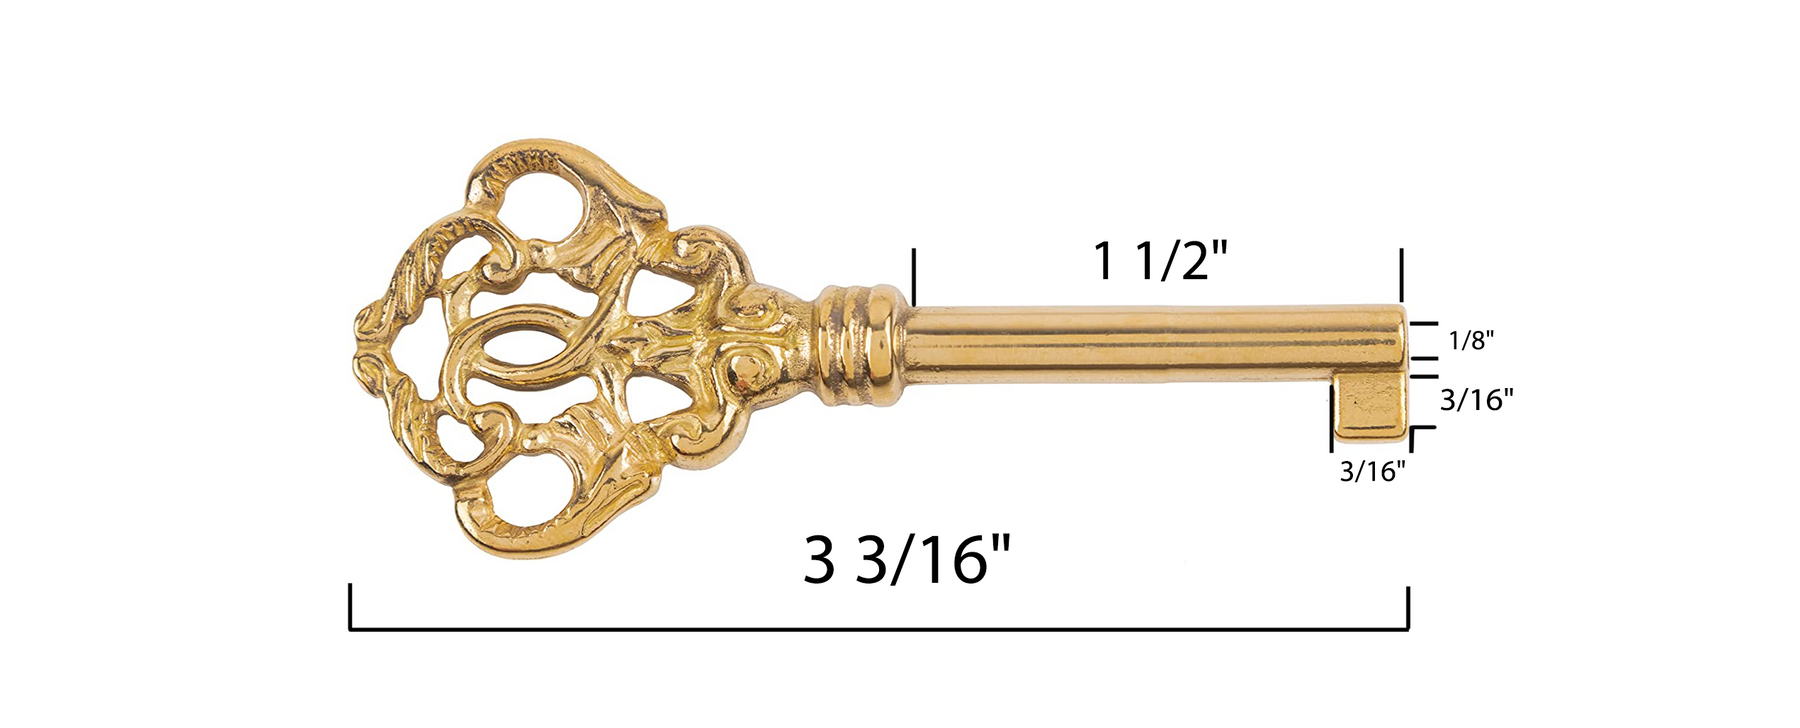 Brass skeleton Key corkscrew vintage 5 inches – Prices $US, includes  shipping US, *Canada